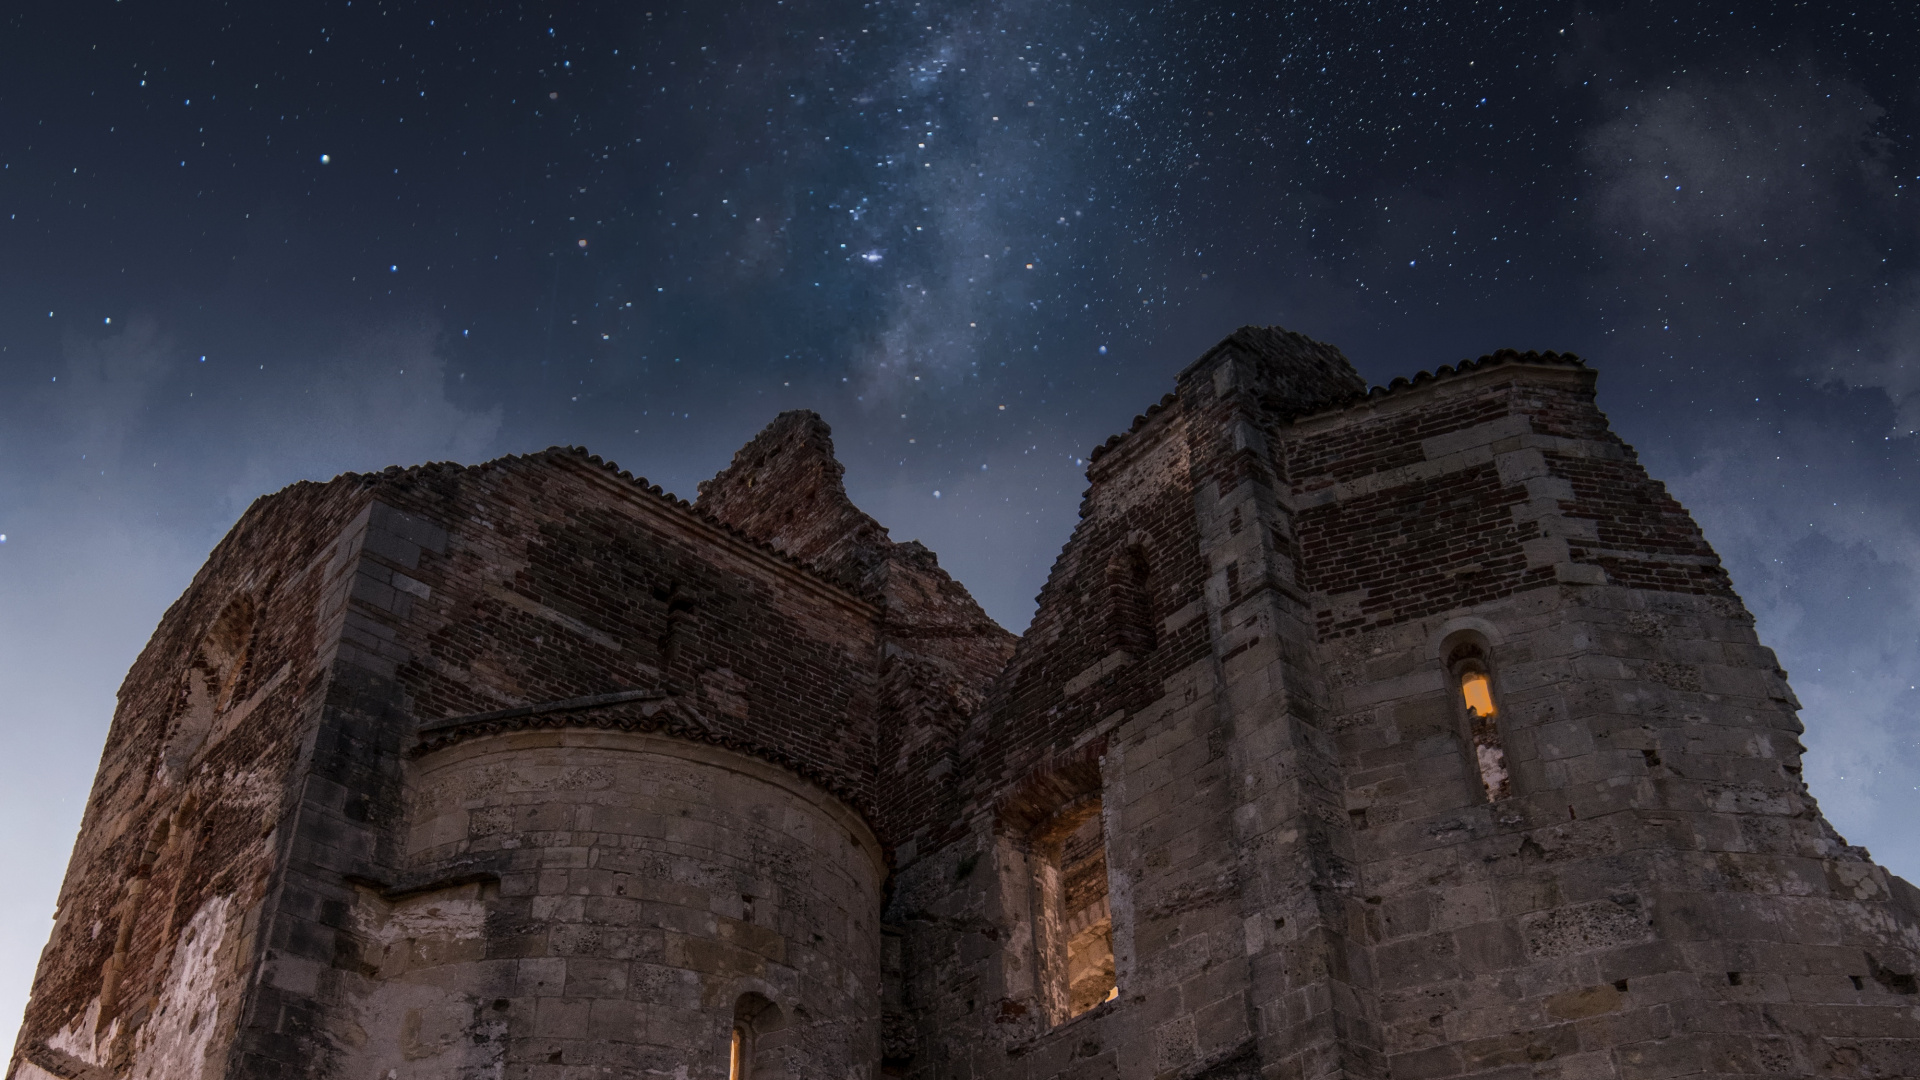 Night, Ruins, Atmosphere, Star, Ancient History. Wallpaper in 1920x1080 Resolution